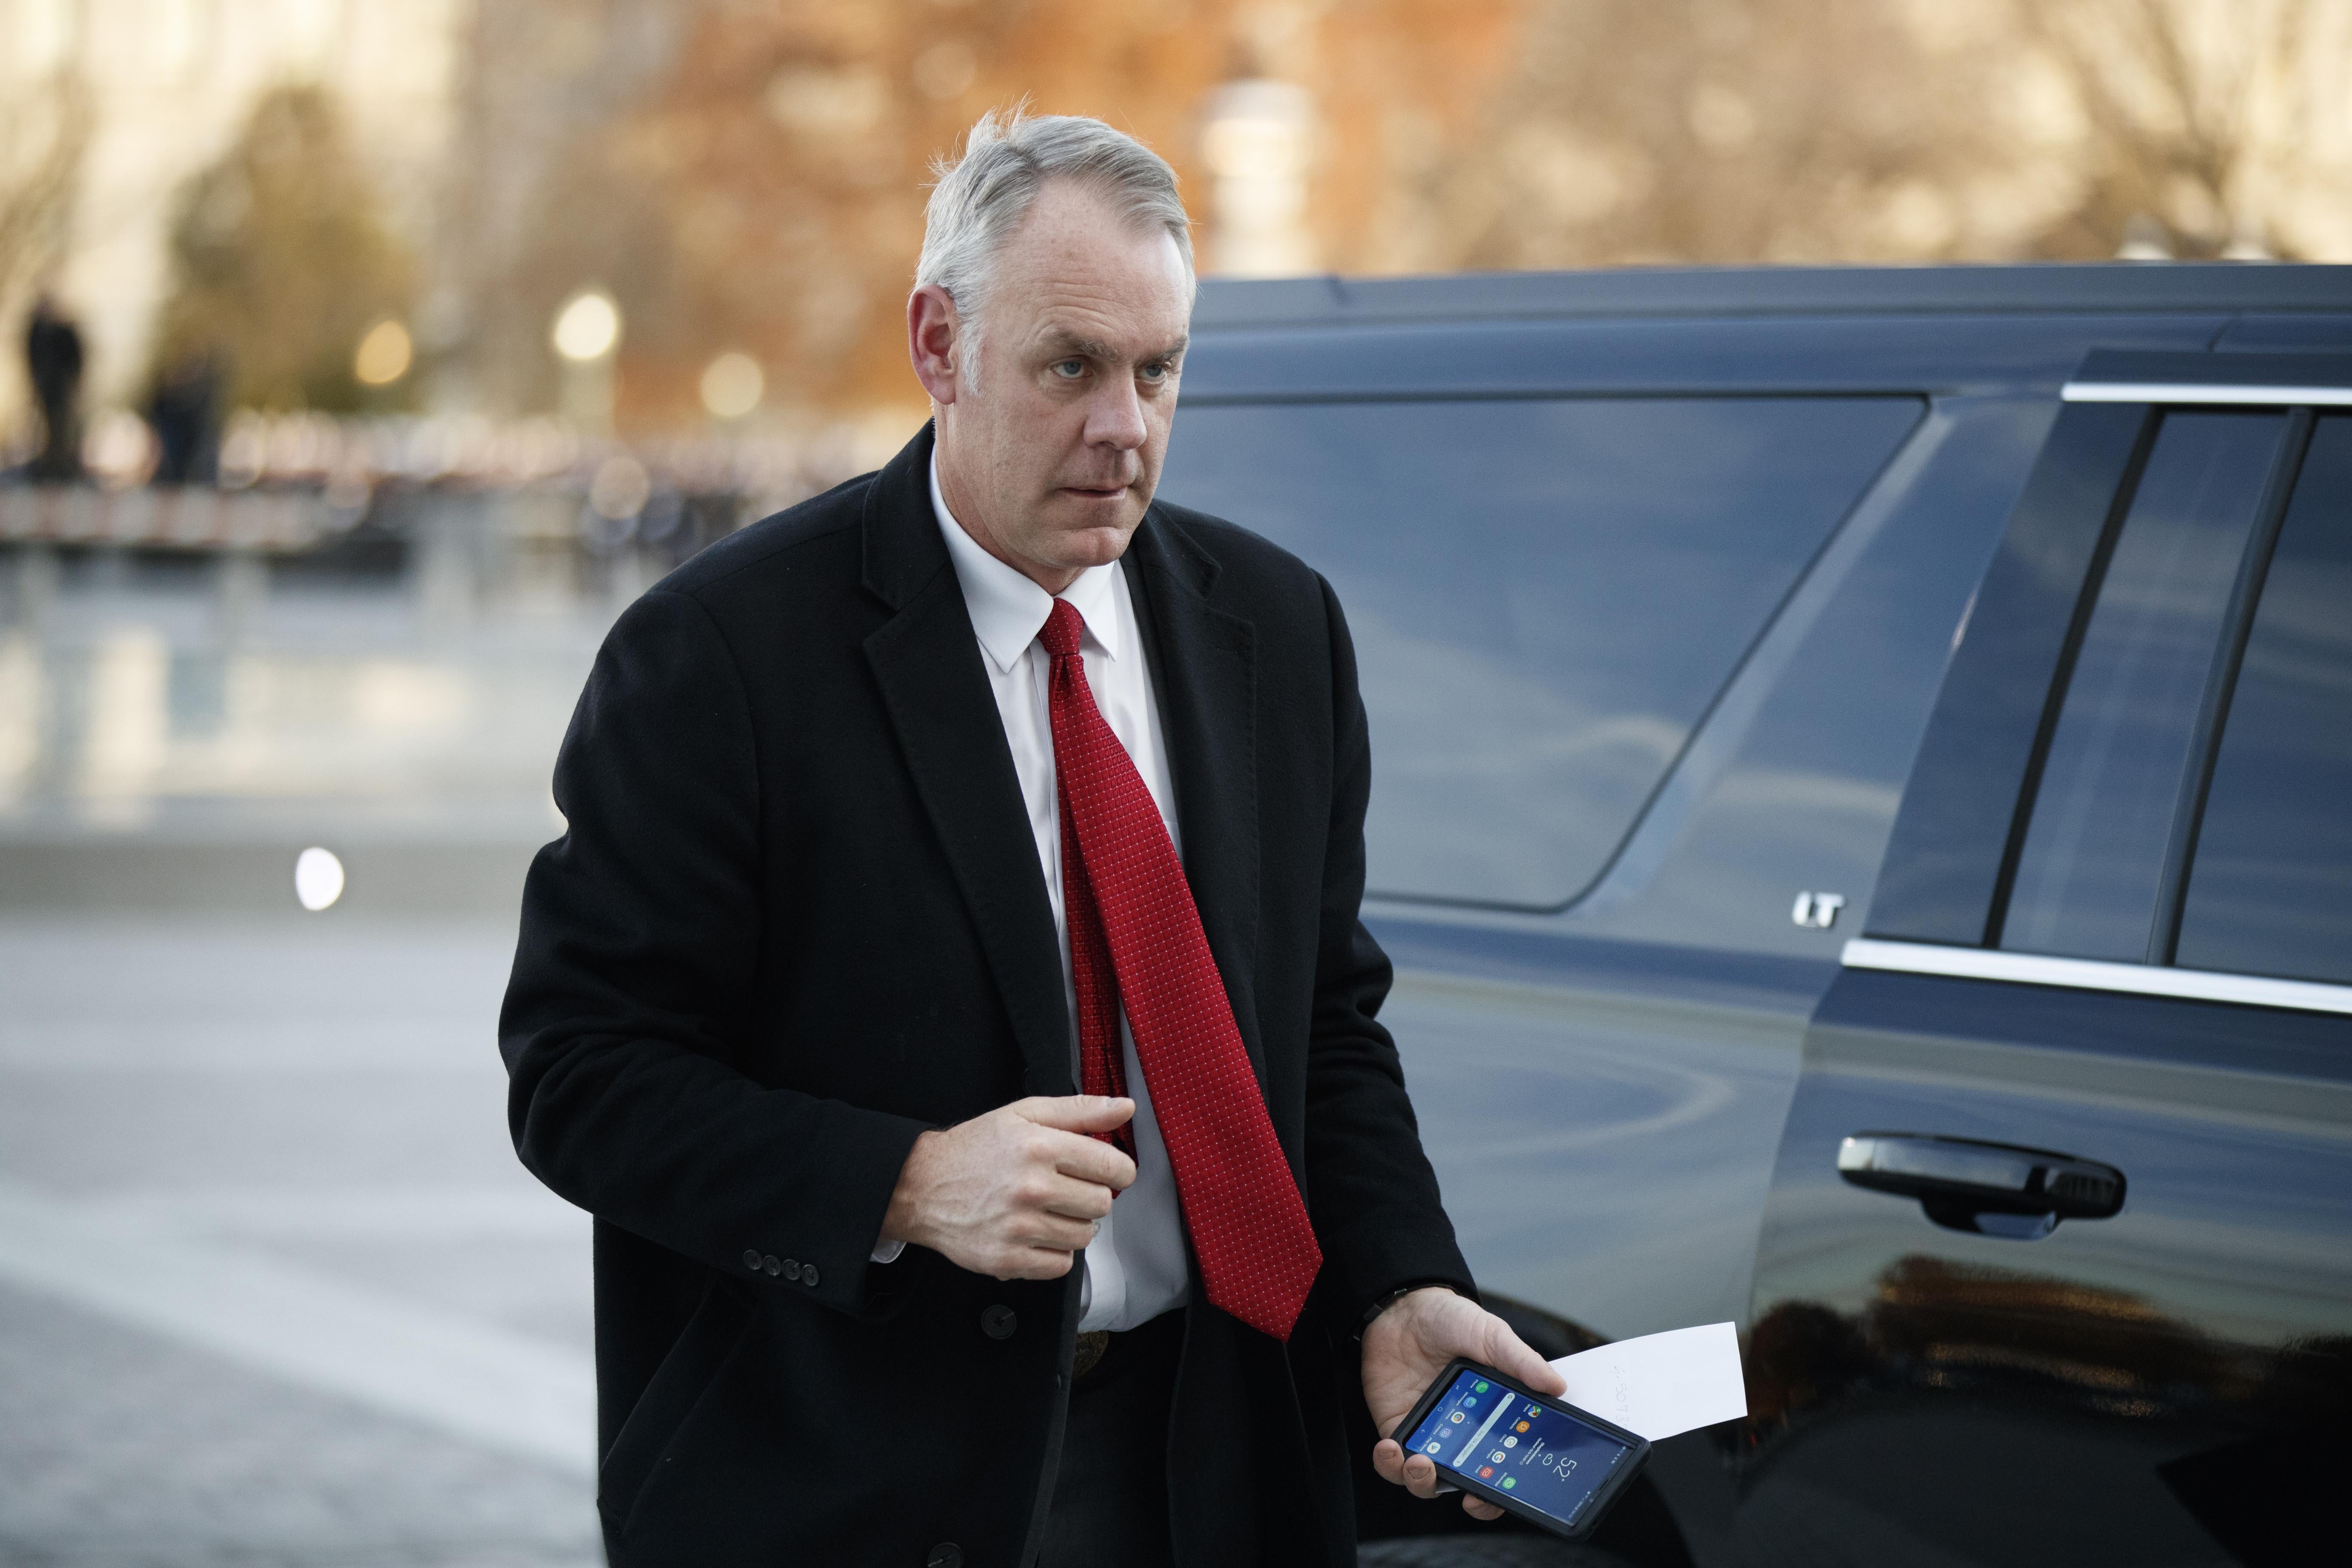 Ryan Zinke Doj Reportedly Investigating Whether He Lied To Inspector General